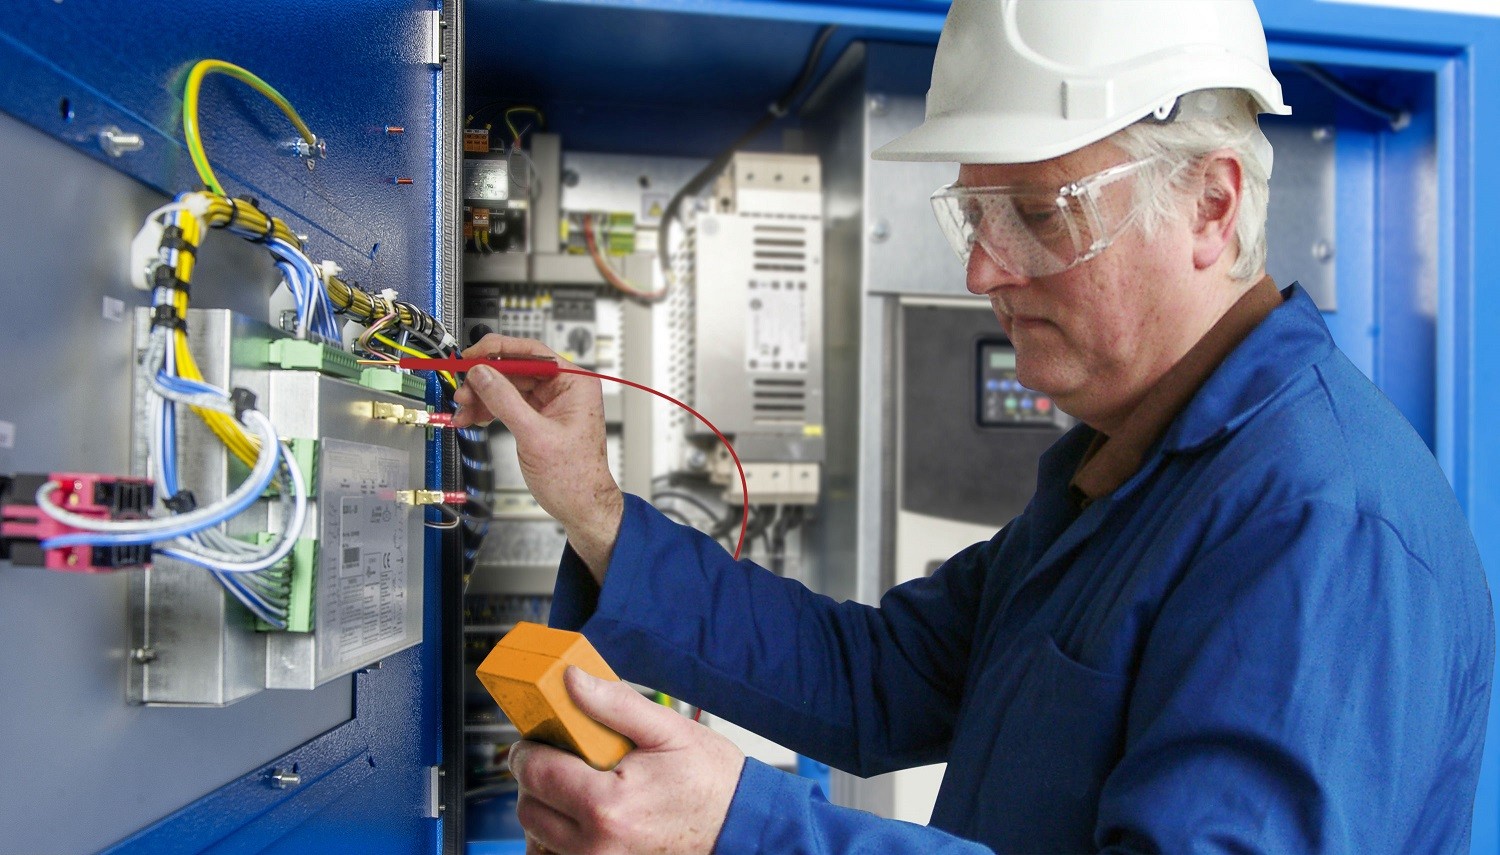 Electrical test technical guides